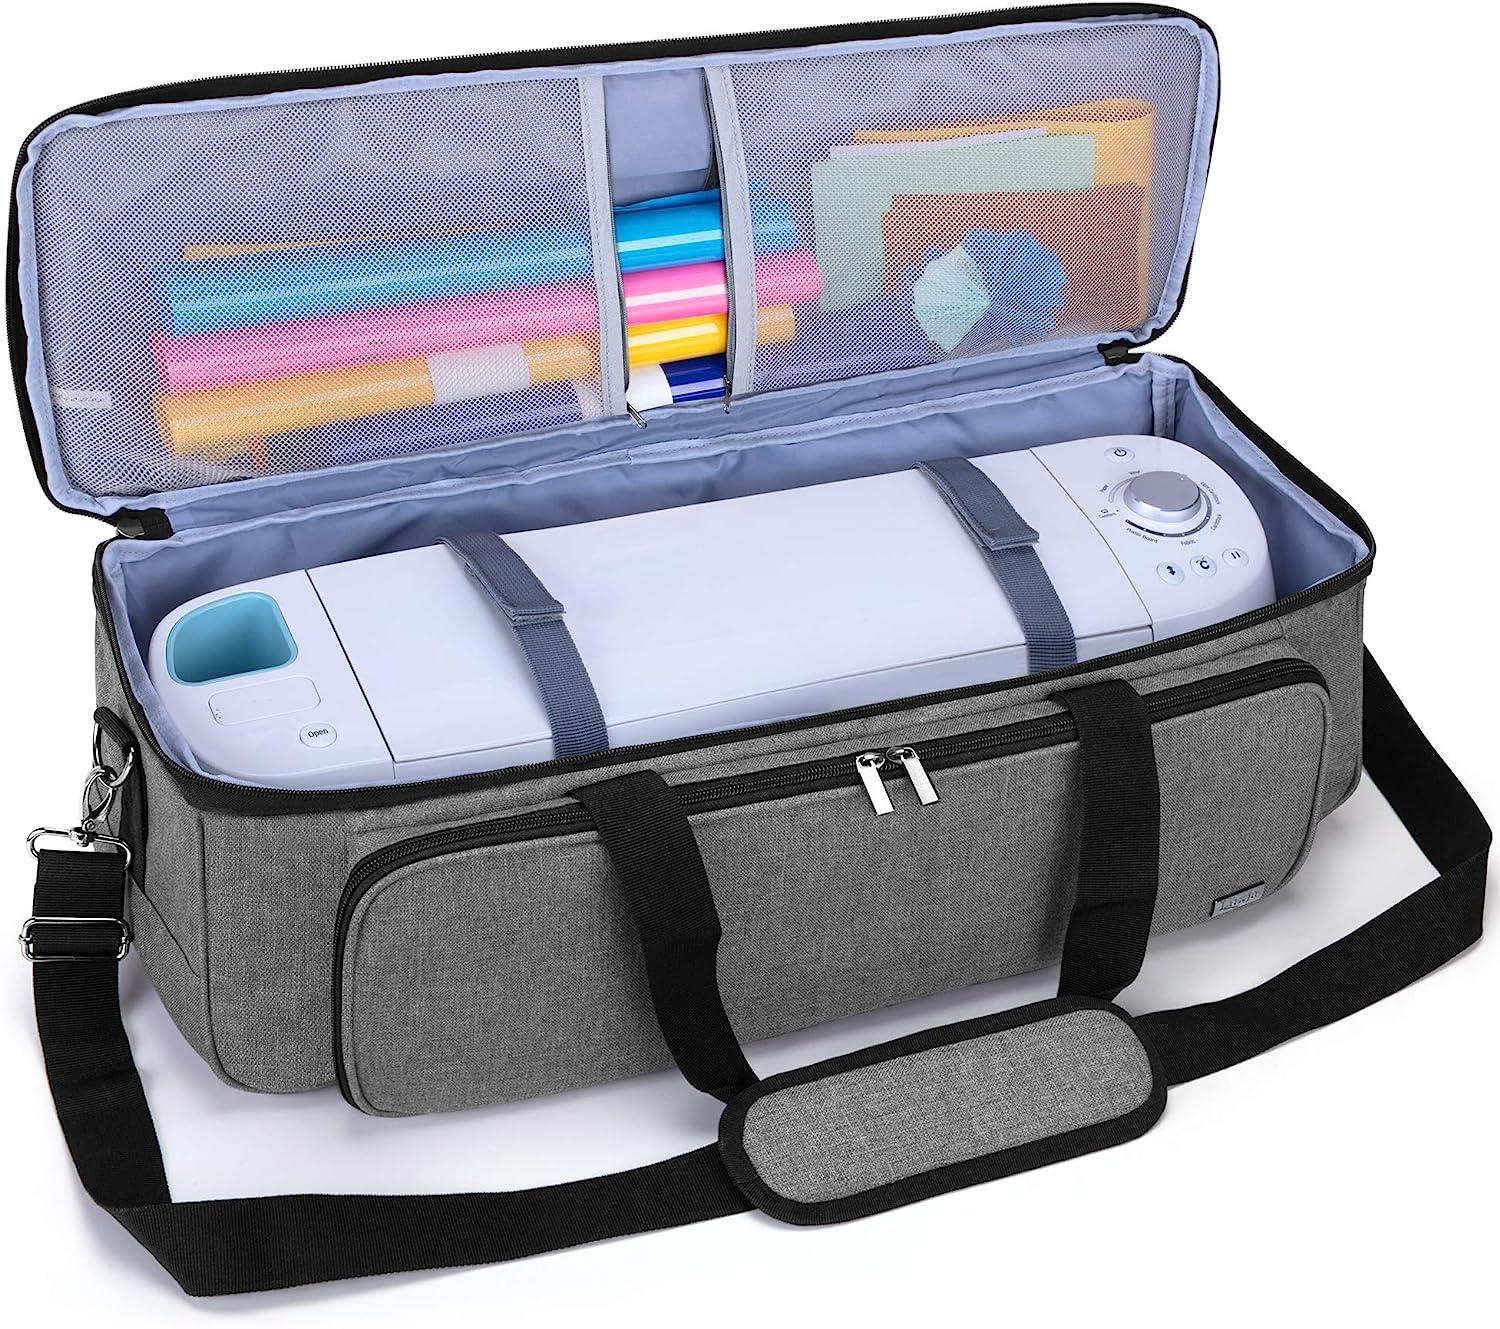  LUXJA Carrying Case Compatible with Cricut Joy and